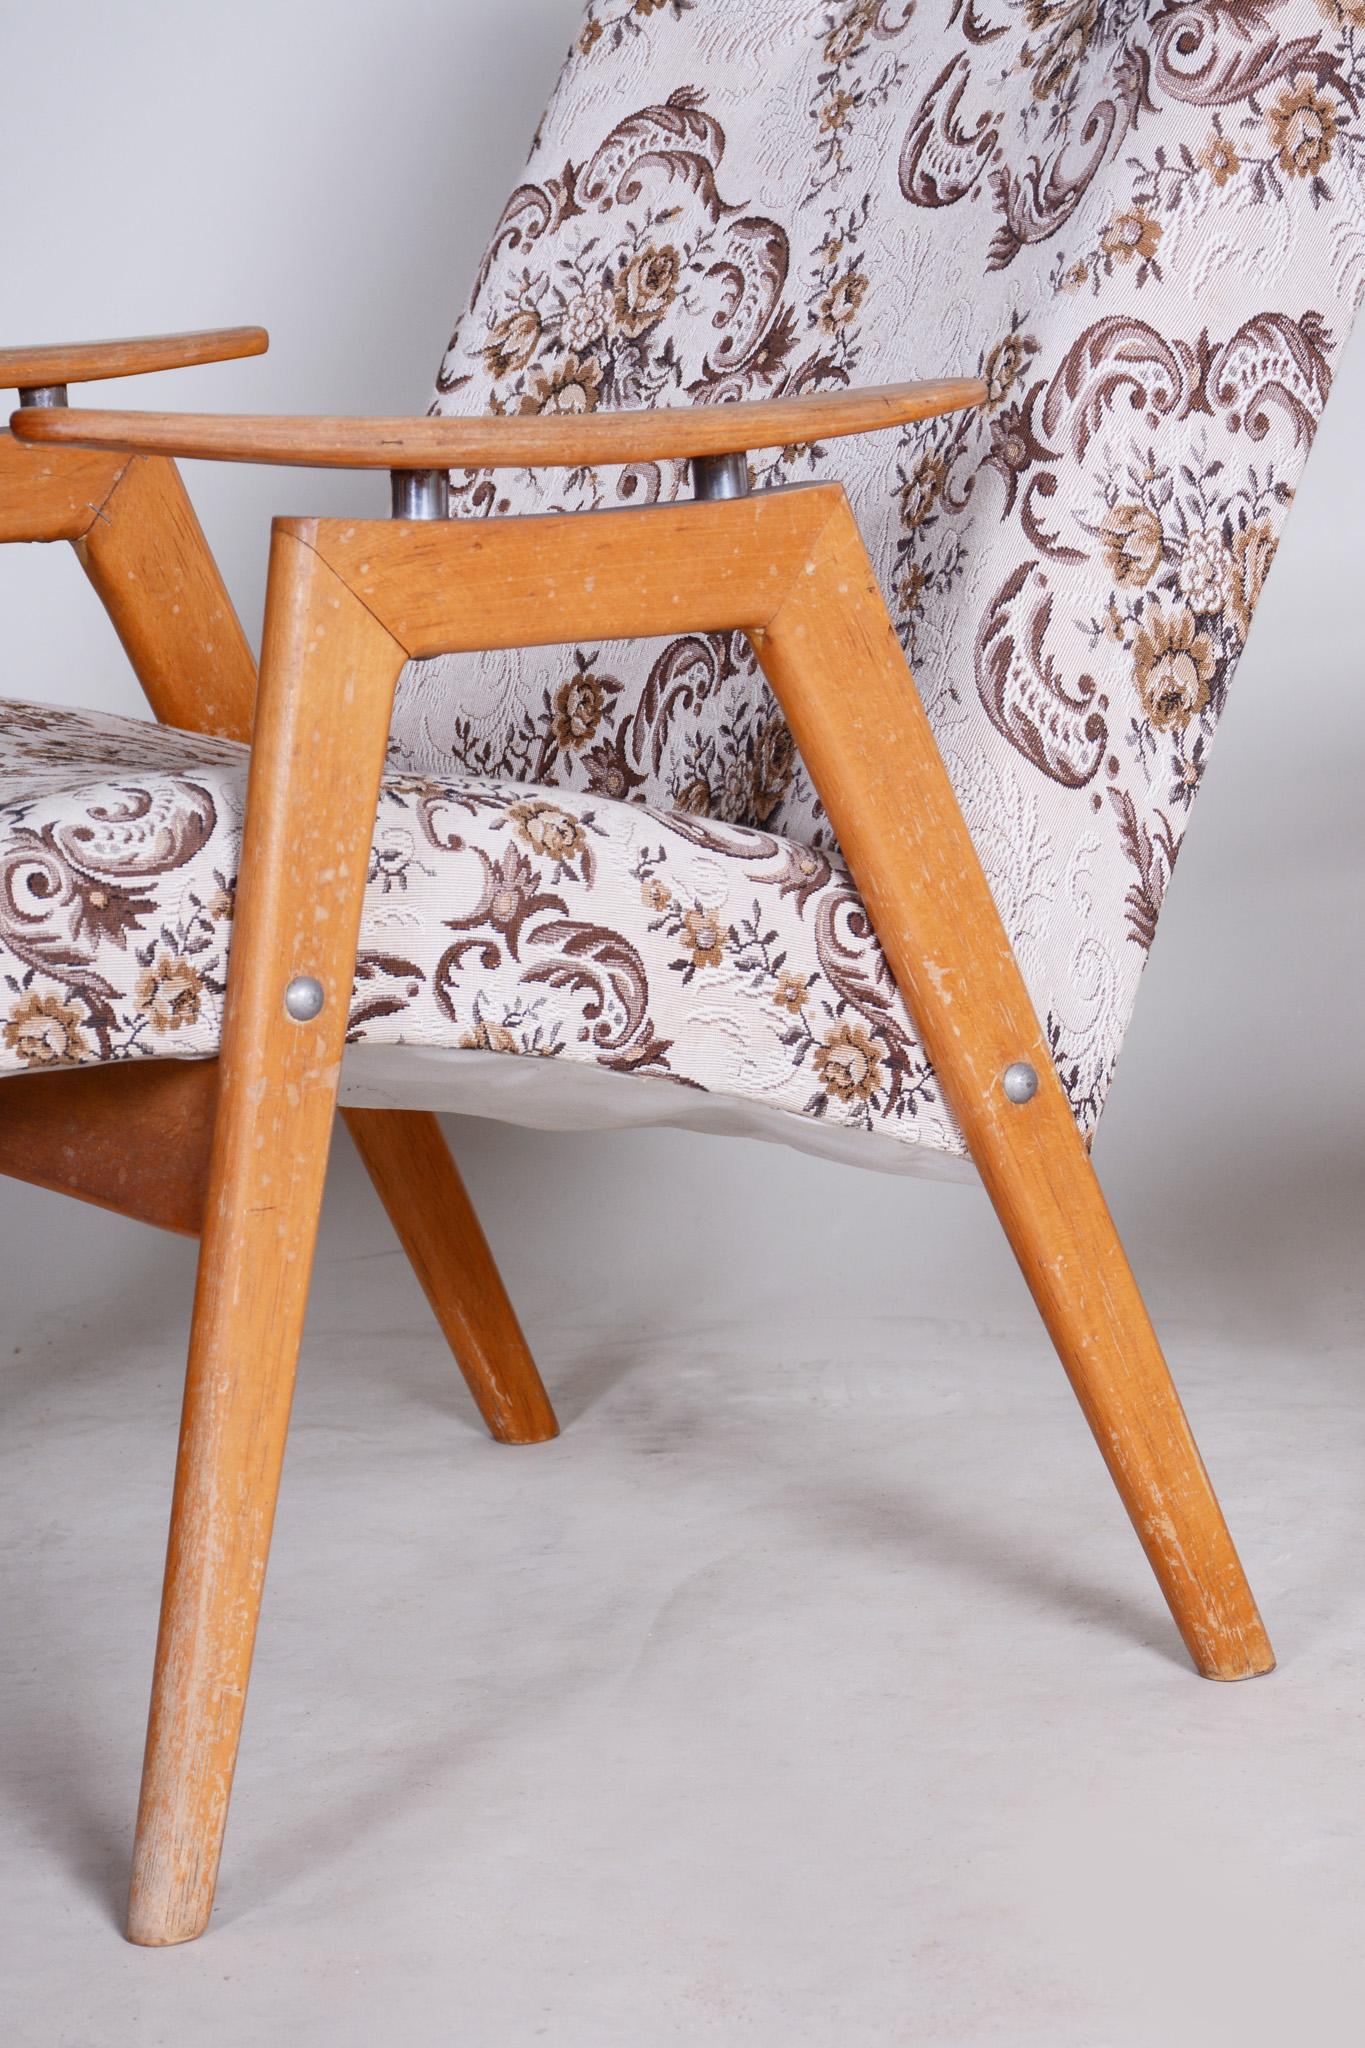 Fabric Pair of Beige Midcentury Armchairs, Made in Czechia, 1950s, Original Condition For Sale